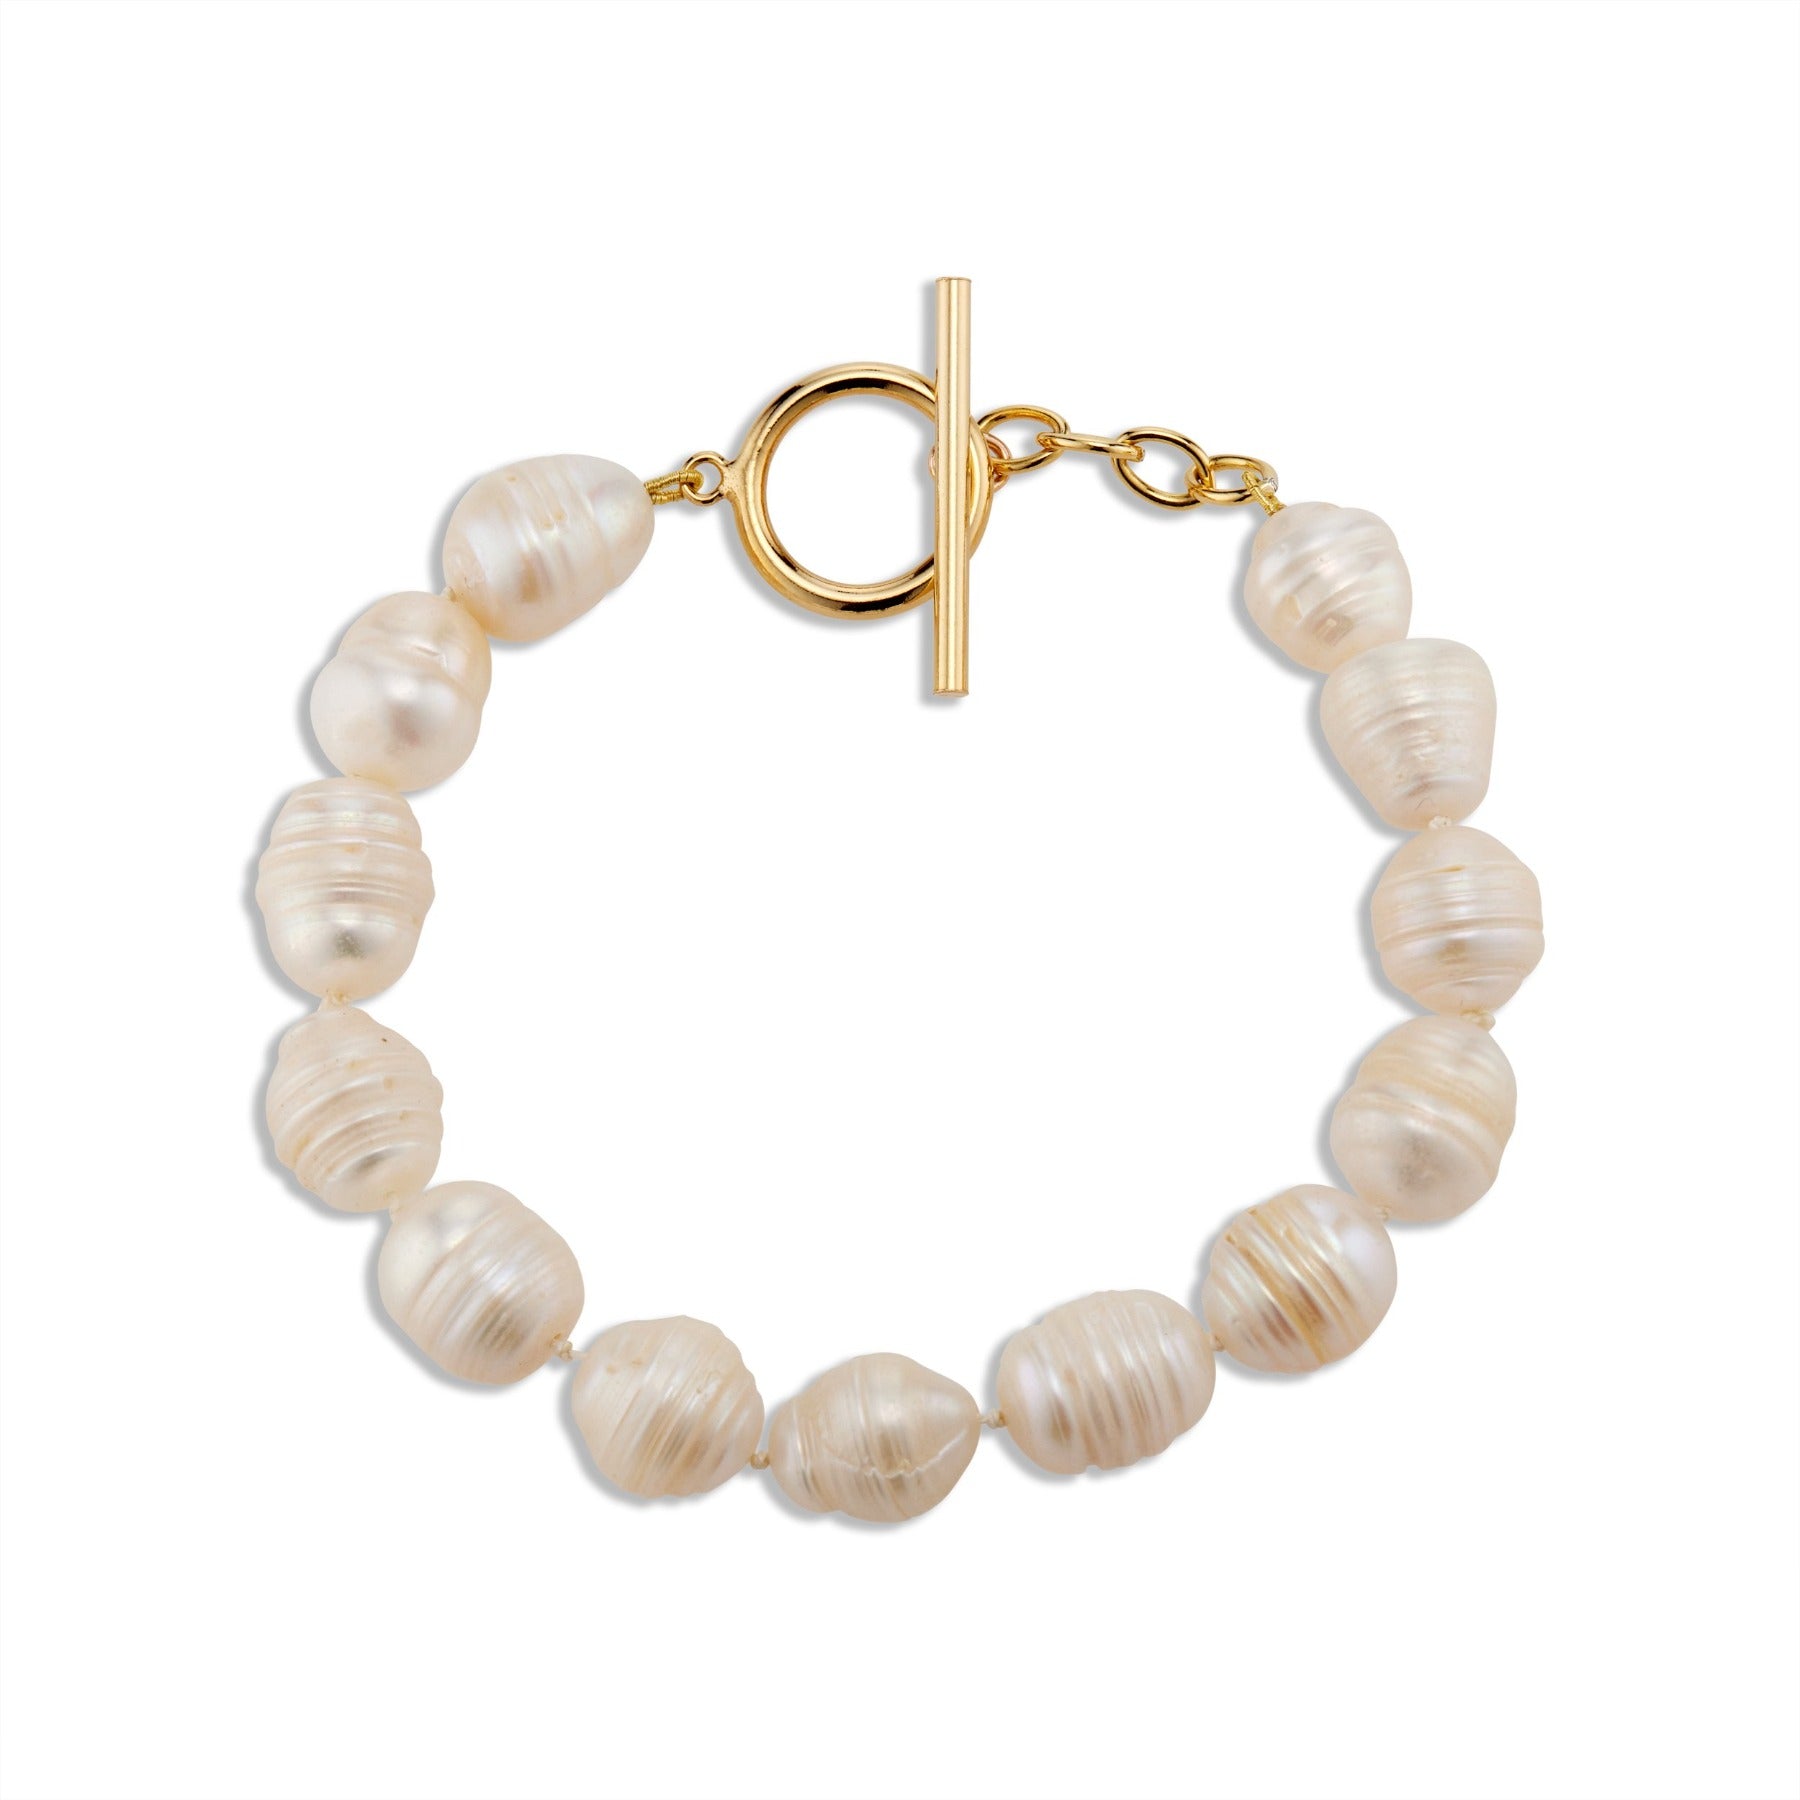 Potato pearl bracelet with 14k gold filled toggle clasp.